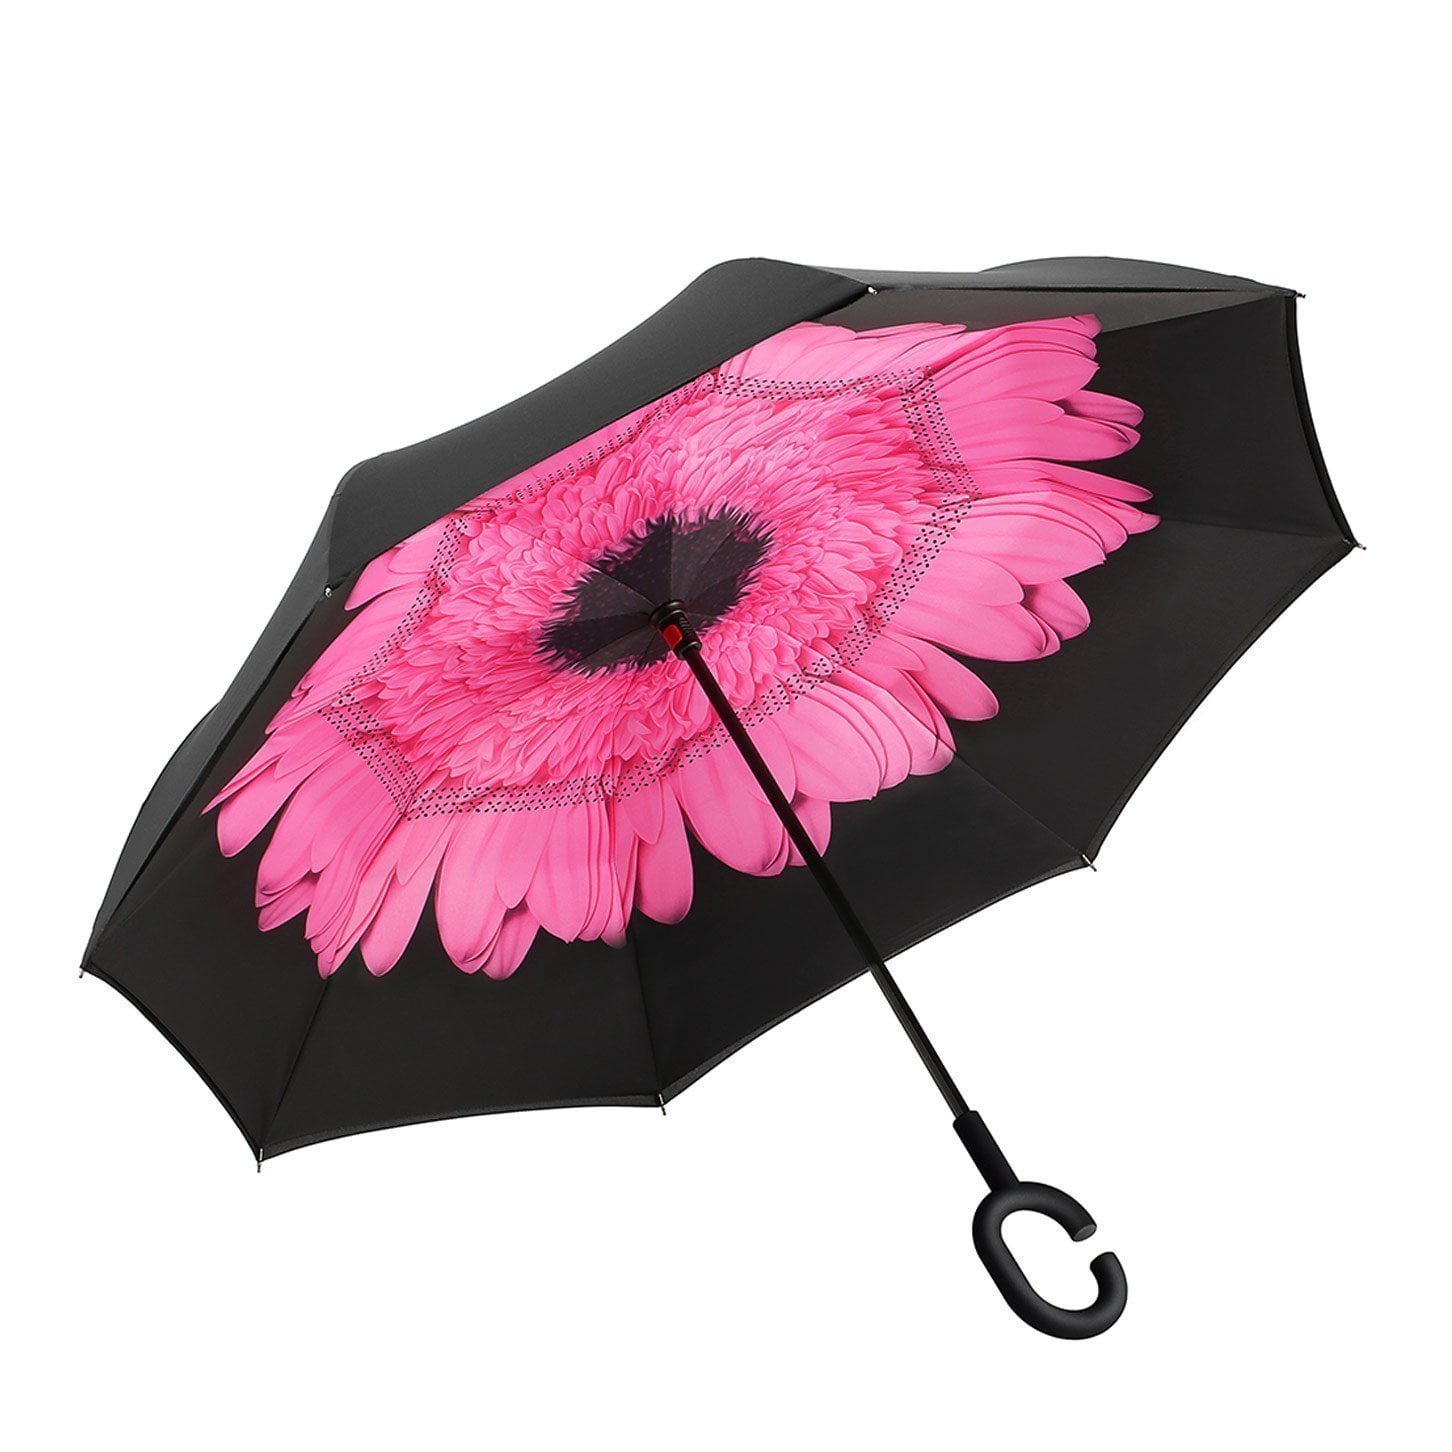 Inverted Umbrella Windproof Reverse Double Layer with C-shaped Hands~USA Seller